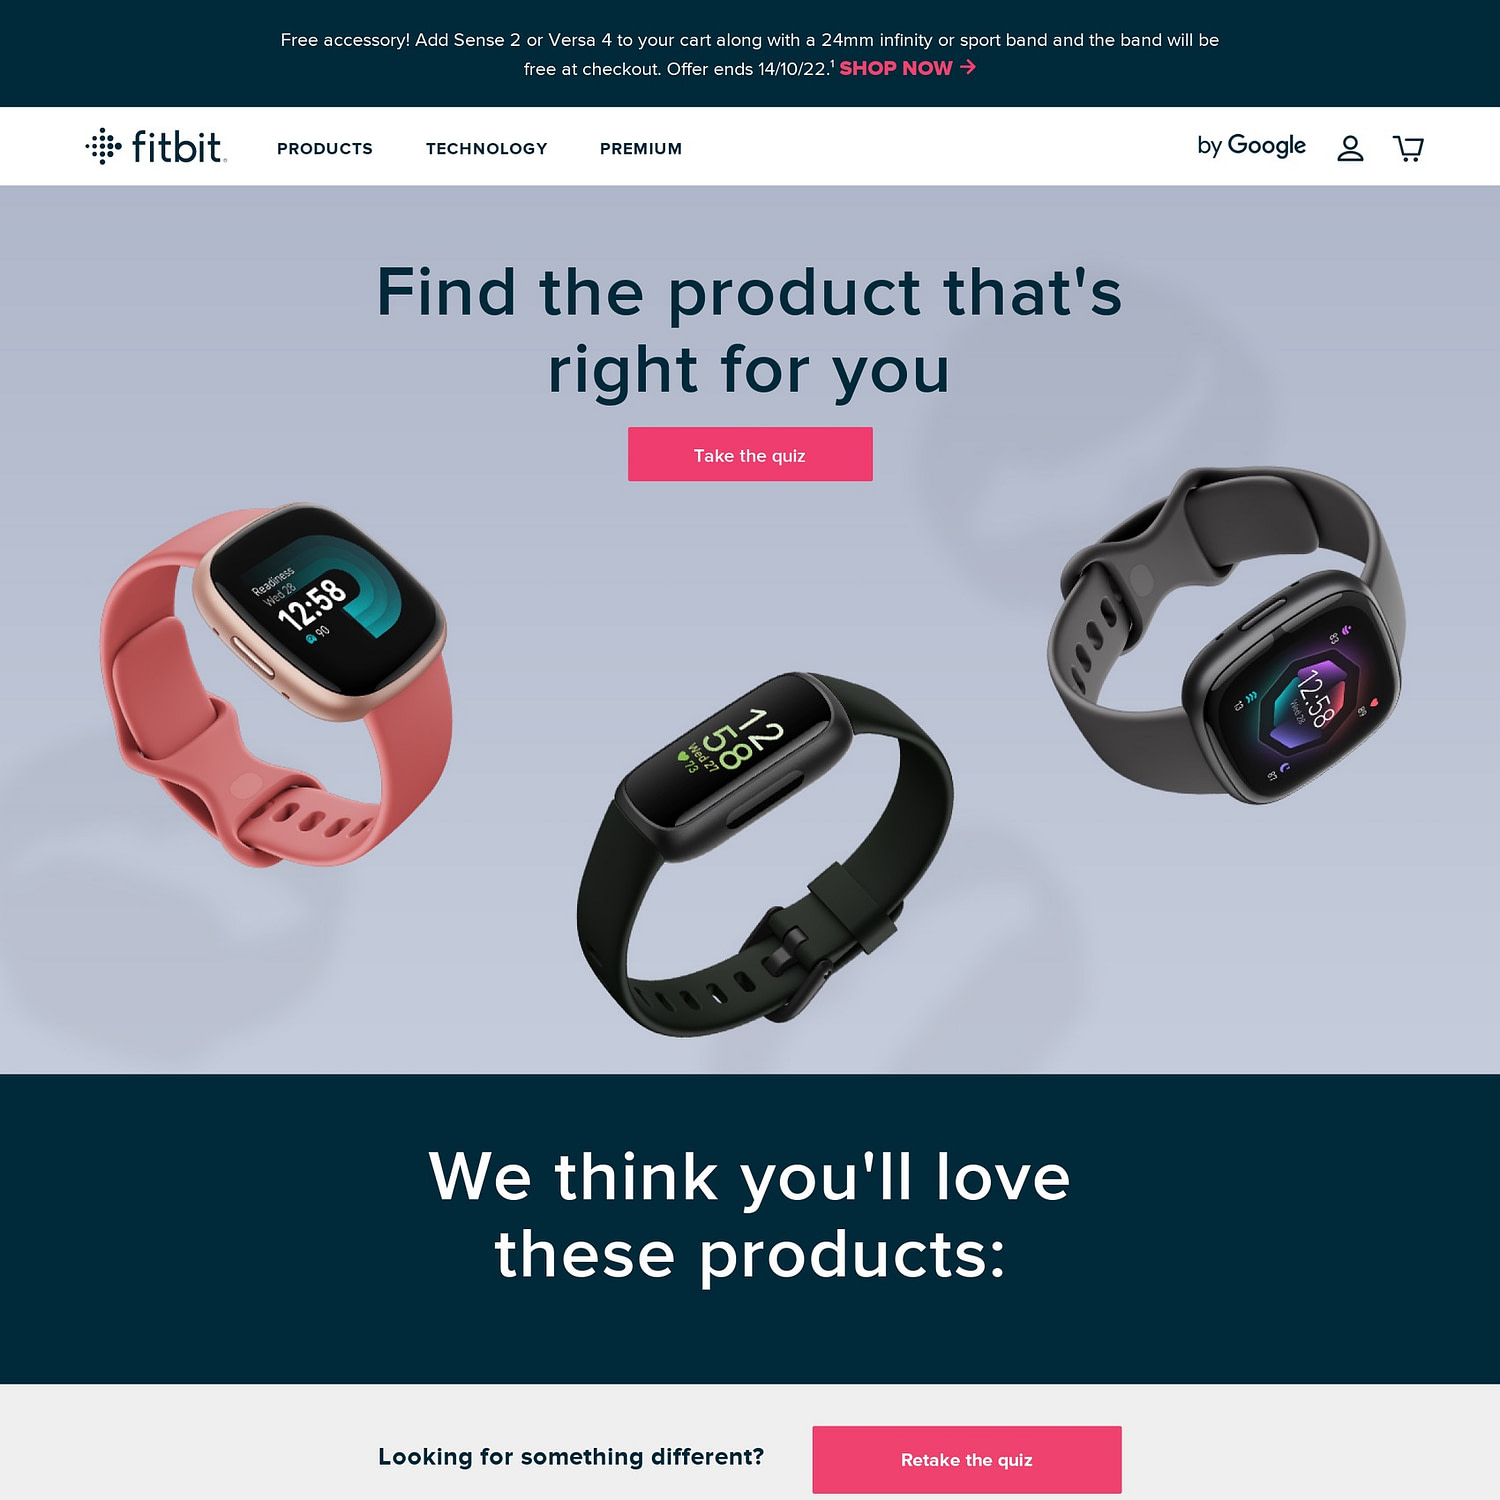 landing page examples: Fitbit